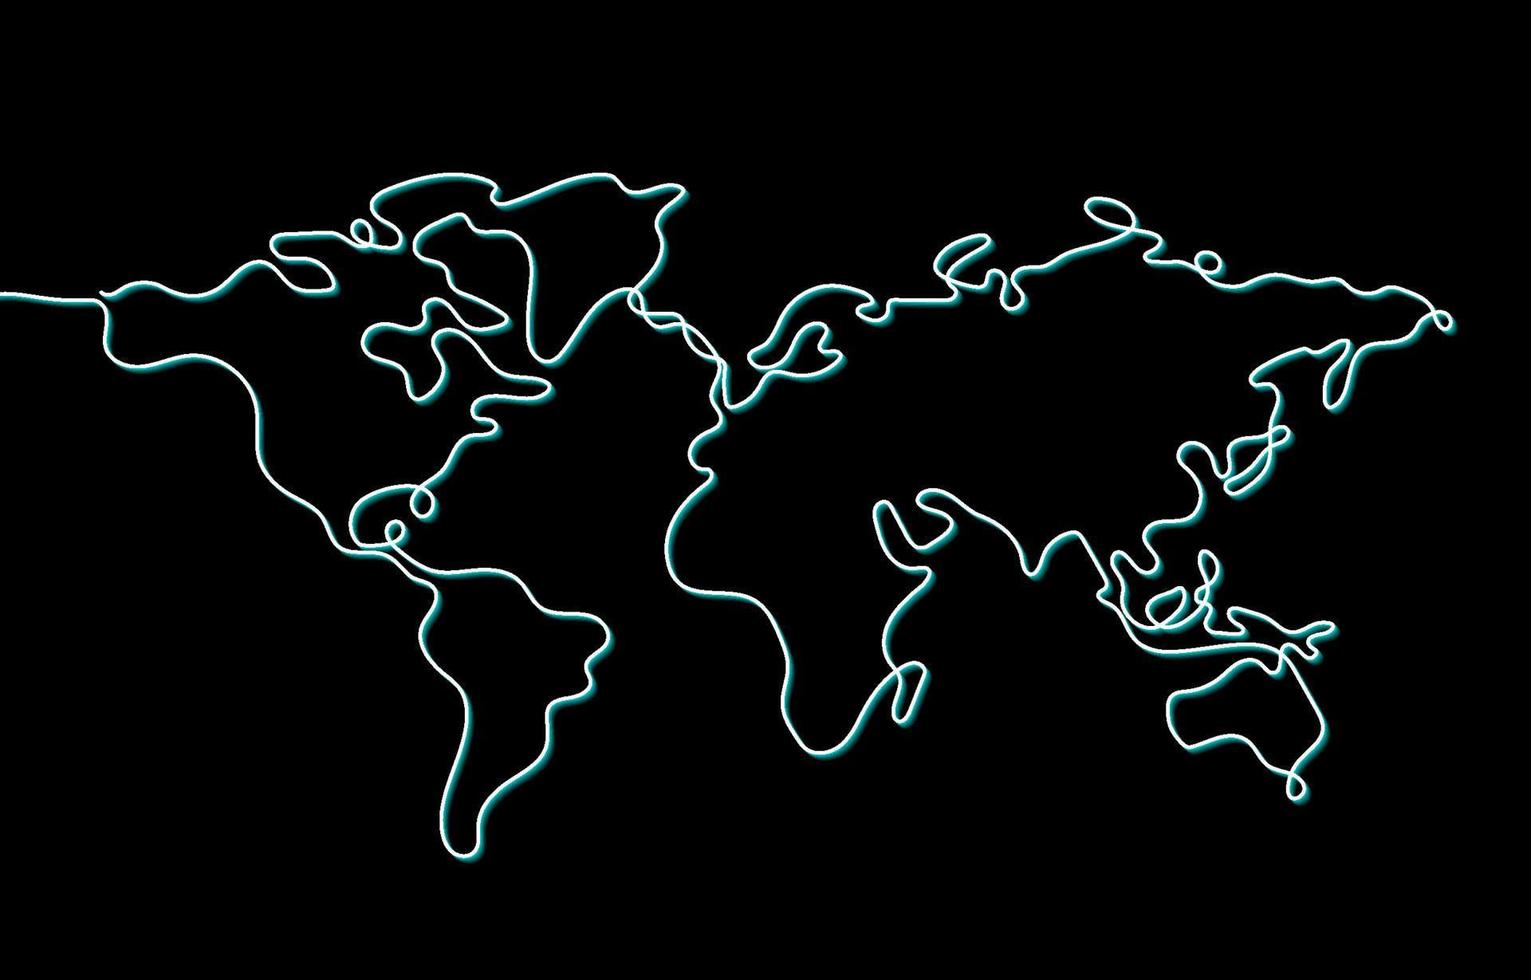 World Map in Outline Style Concept vector